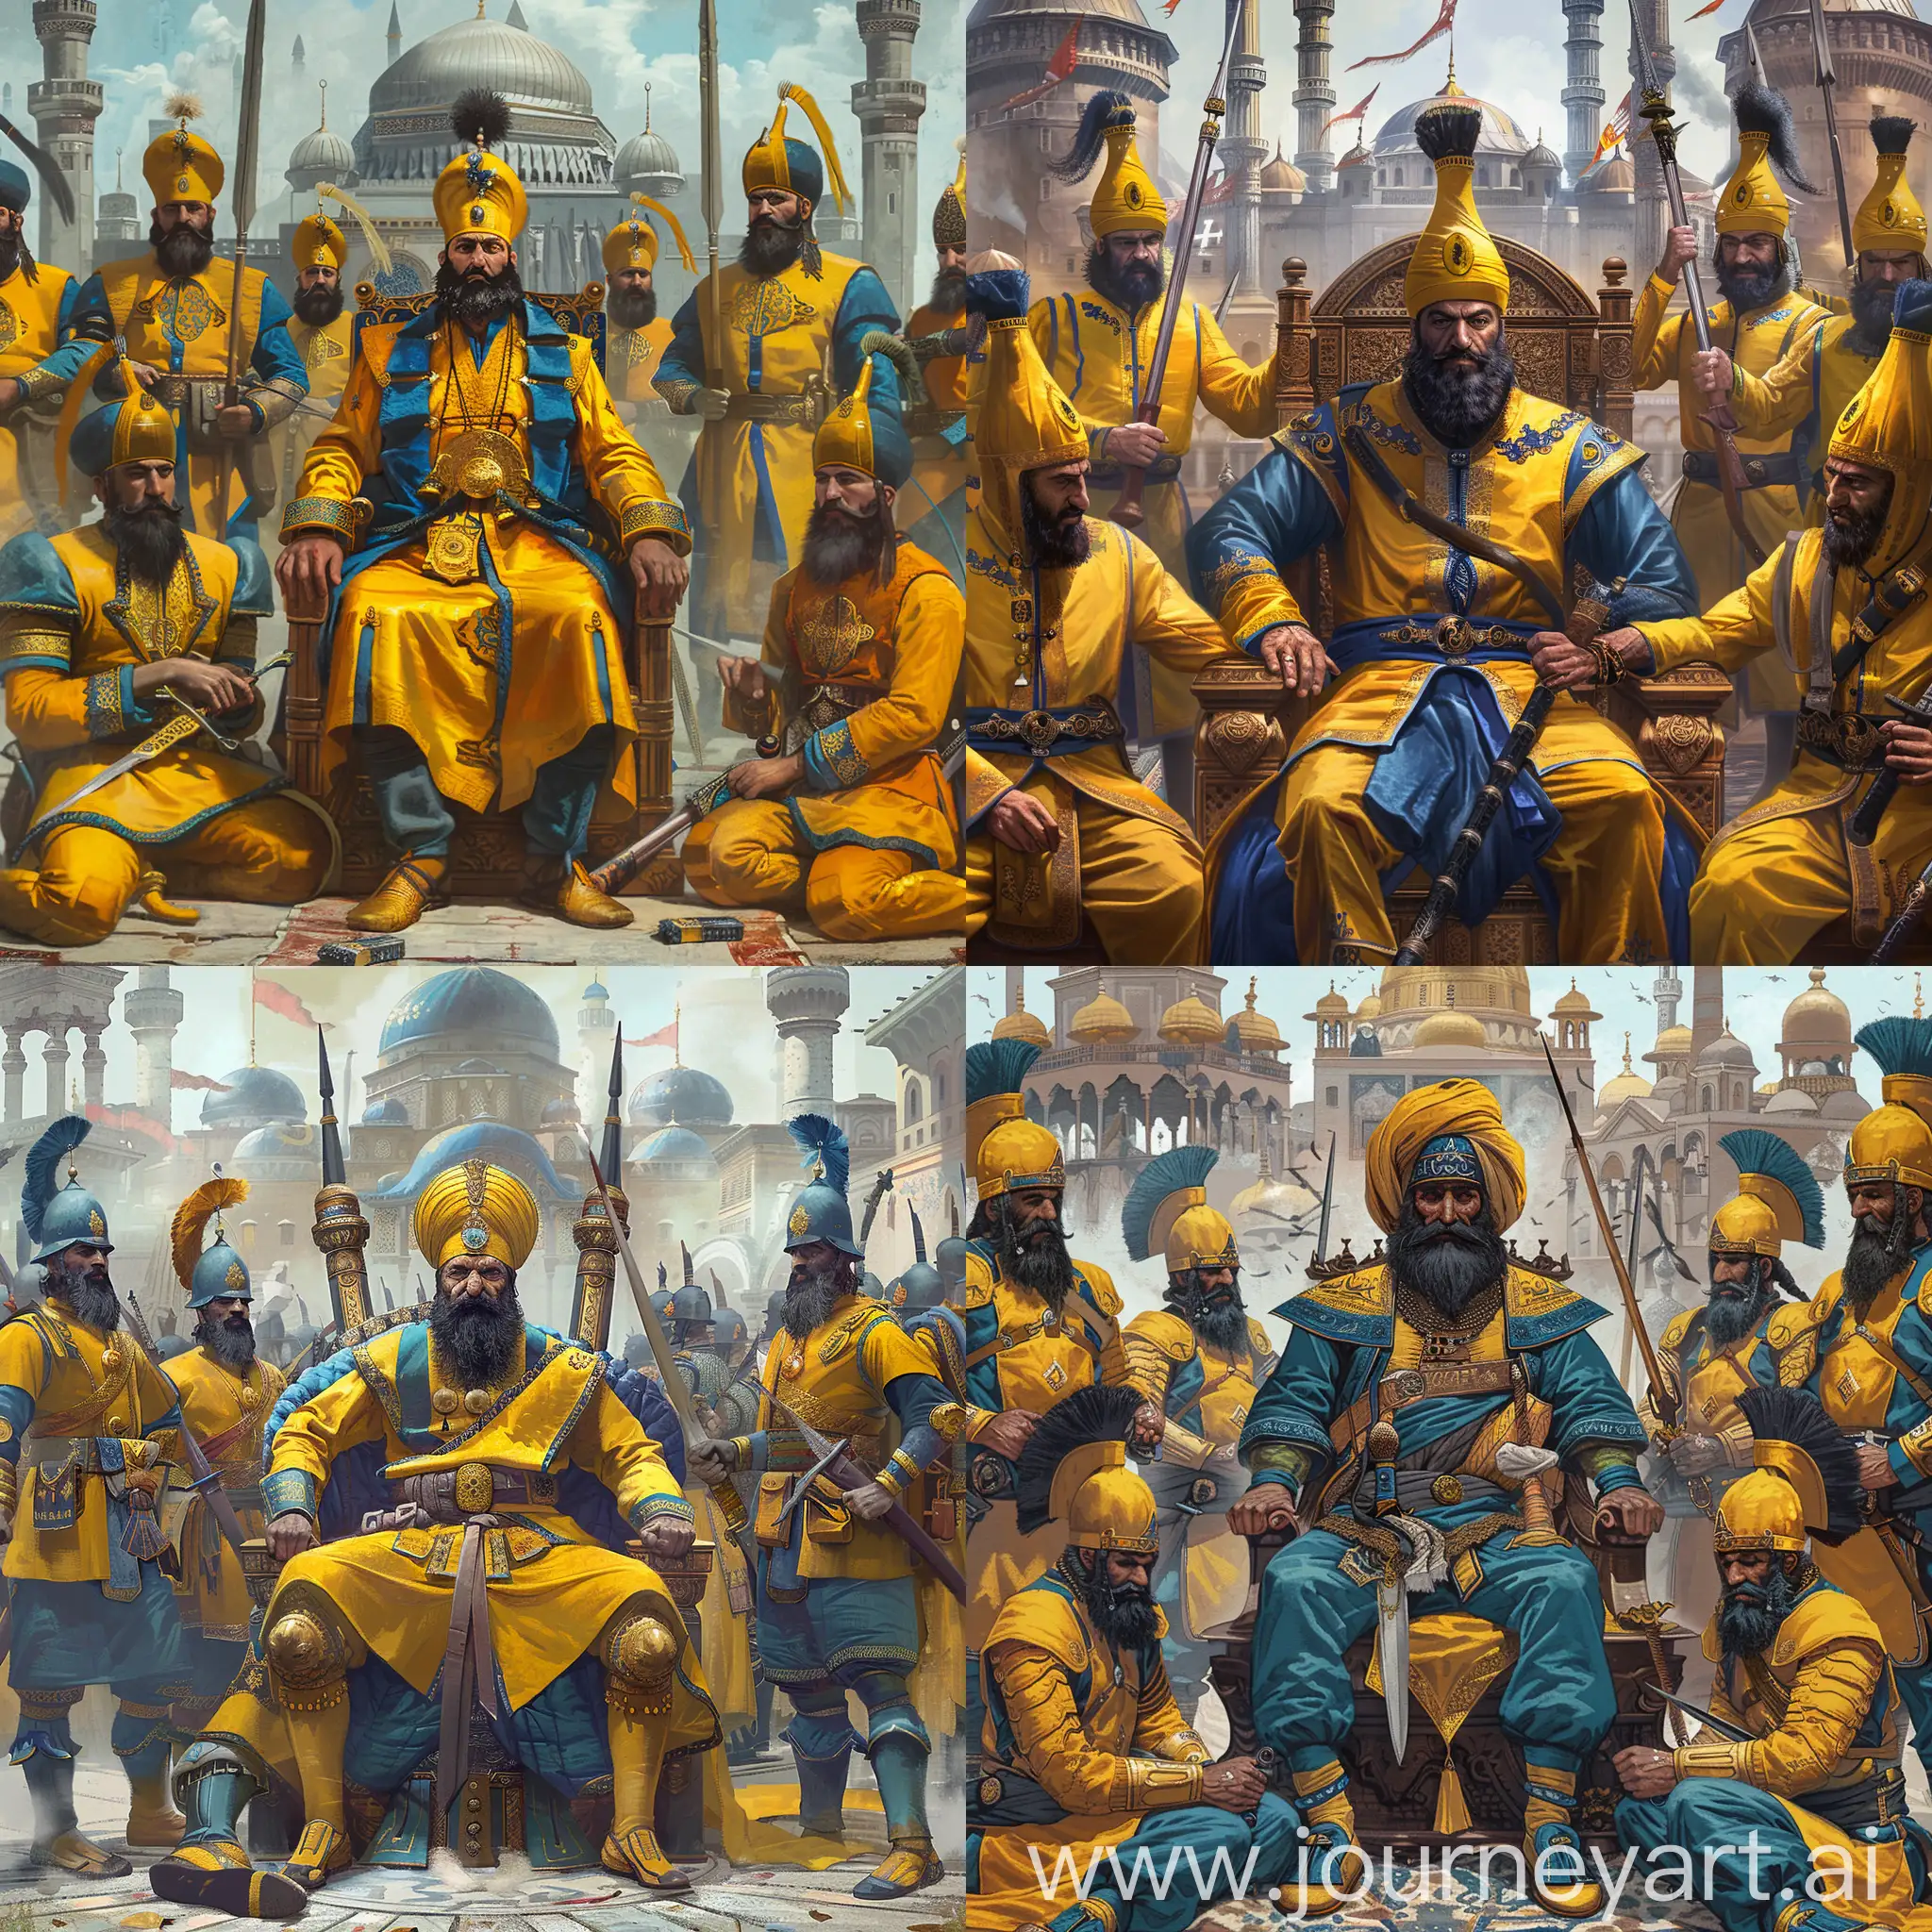 a middle-aged ancient Ottoman sultan is sitting on his imperial throne in the middle, he has black Ottoman style beard, yellow-blue Ottoman hat and costume,

other Ottoman janissaries are in yellow and blue color armor, they hold swords or spears in hands, they have janissaries hat and black beard, they stand around the sultan, with slippers,

they are all before an Ottoman palace, other Ottoman temples as background,